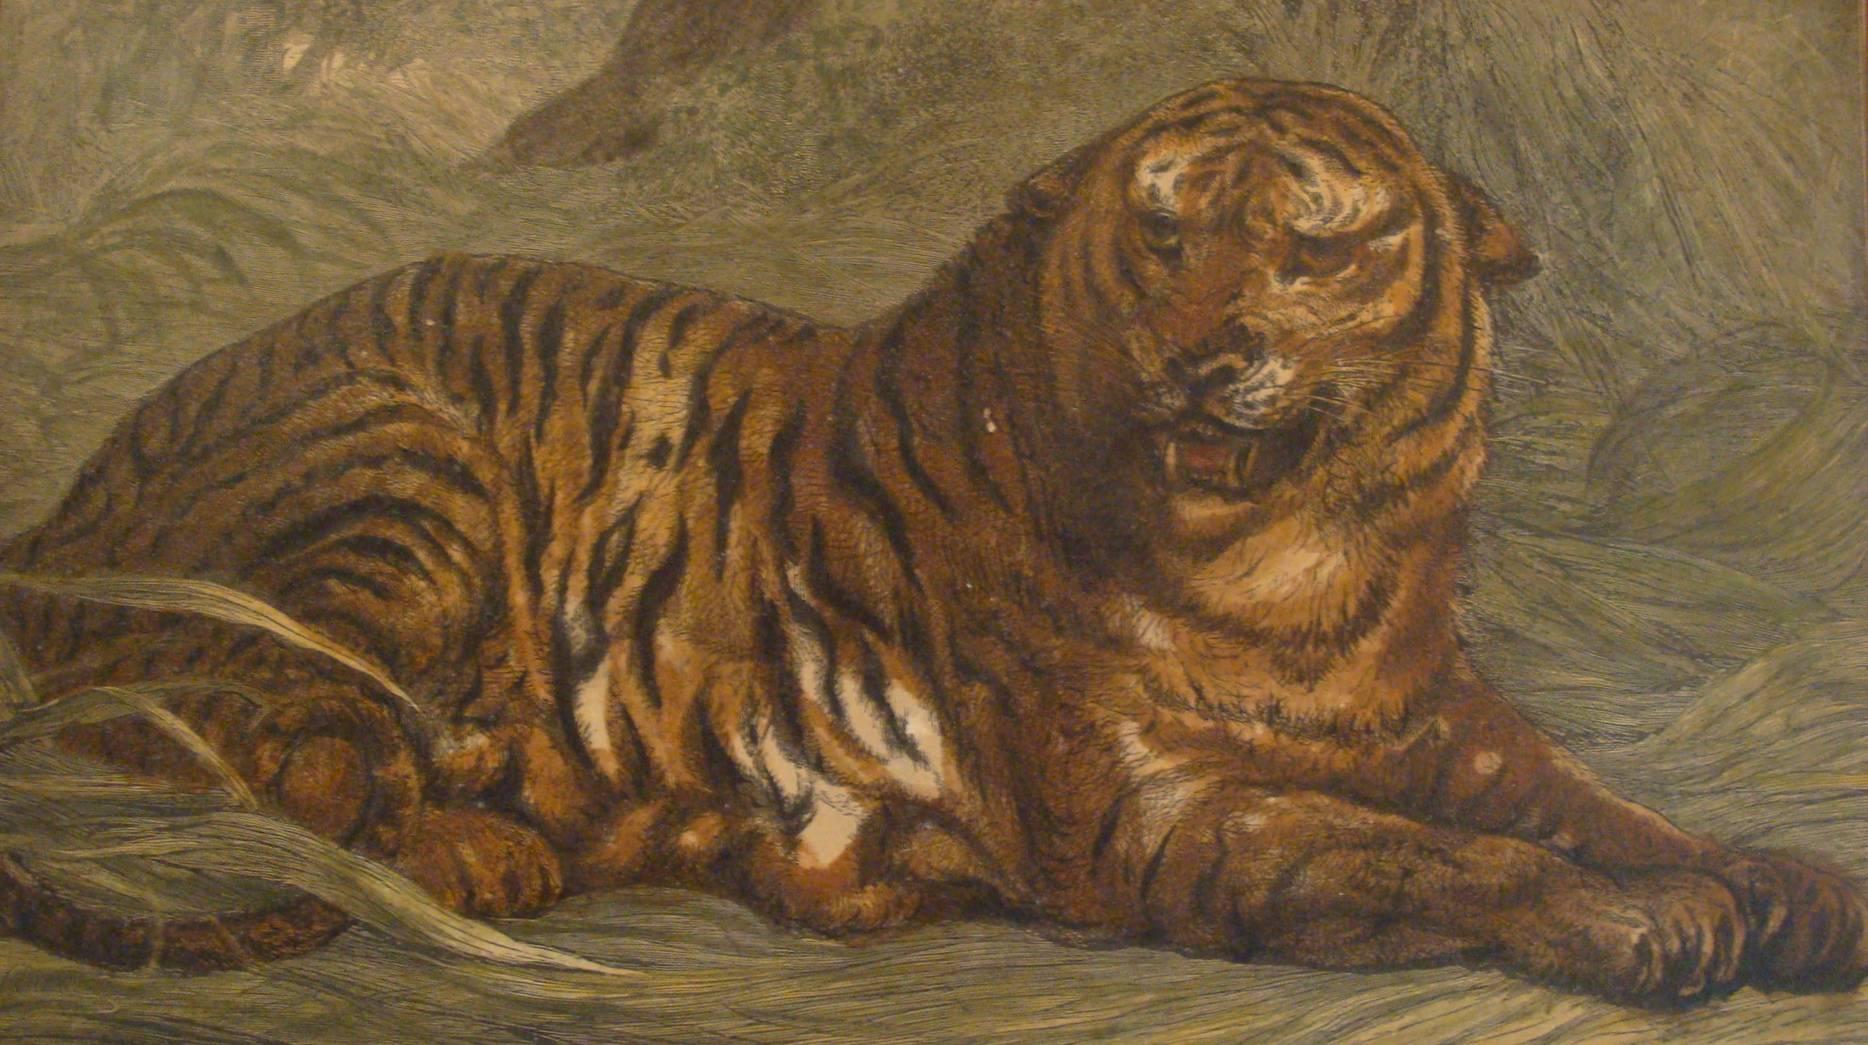 Offered is a beautiful, 19th century Victorian, hand-colored engraving of a reclining tiger with teeth barred and ears laid back. Displayed in a late 19th century heavily decorated deep-cove frame with bright gold gilding and black ebonized accent